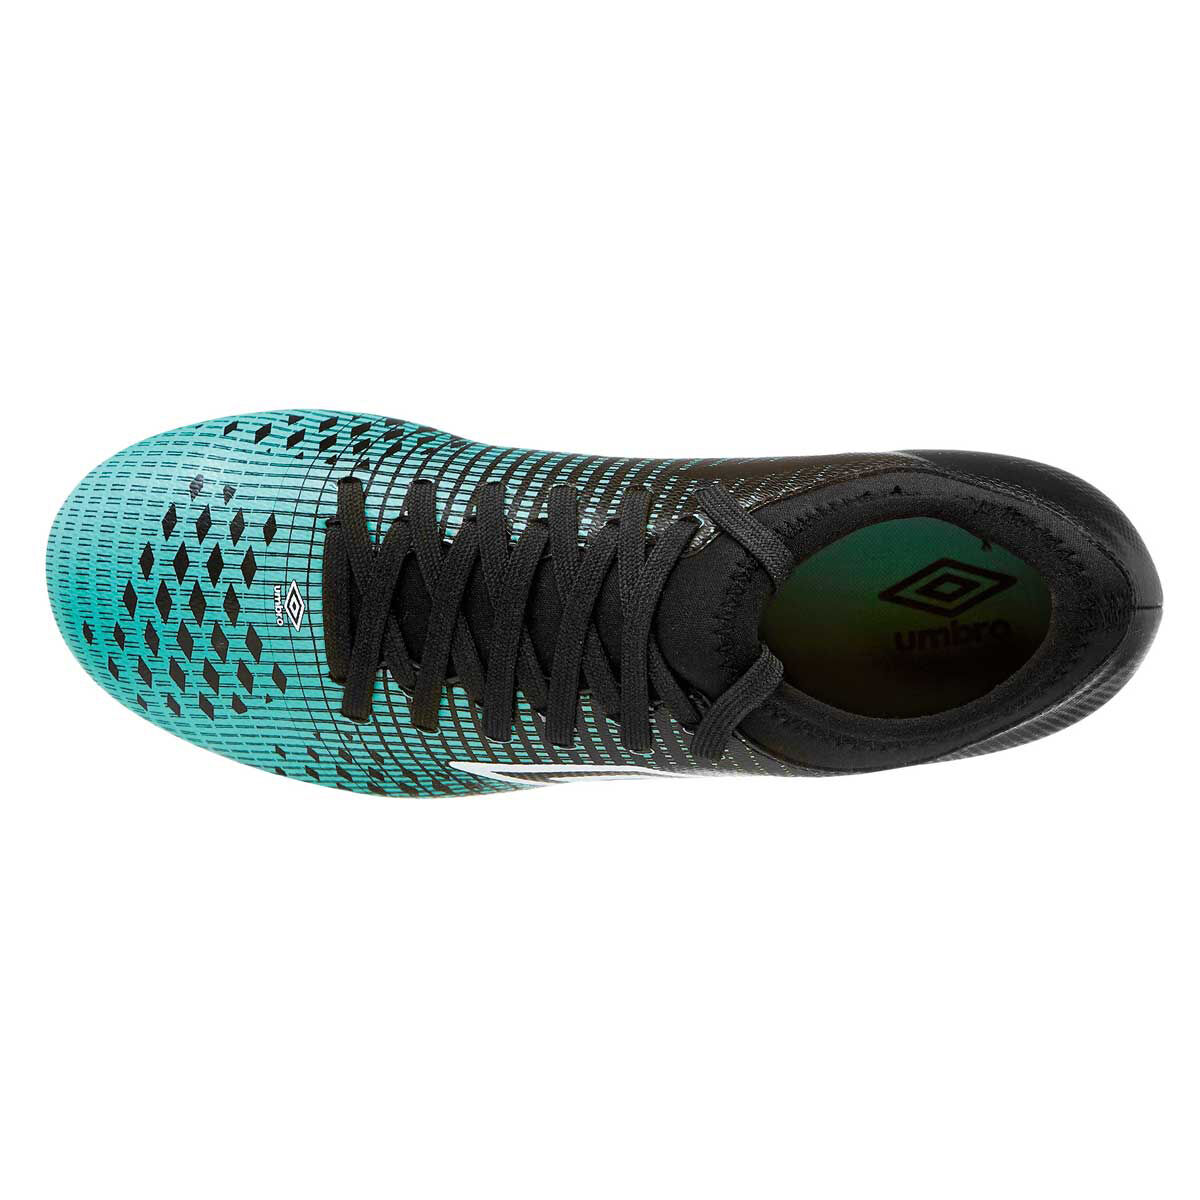 rebel sport touch shoes